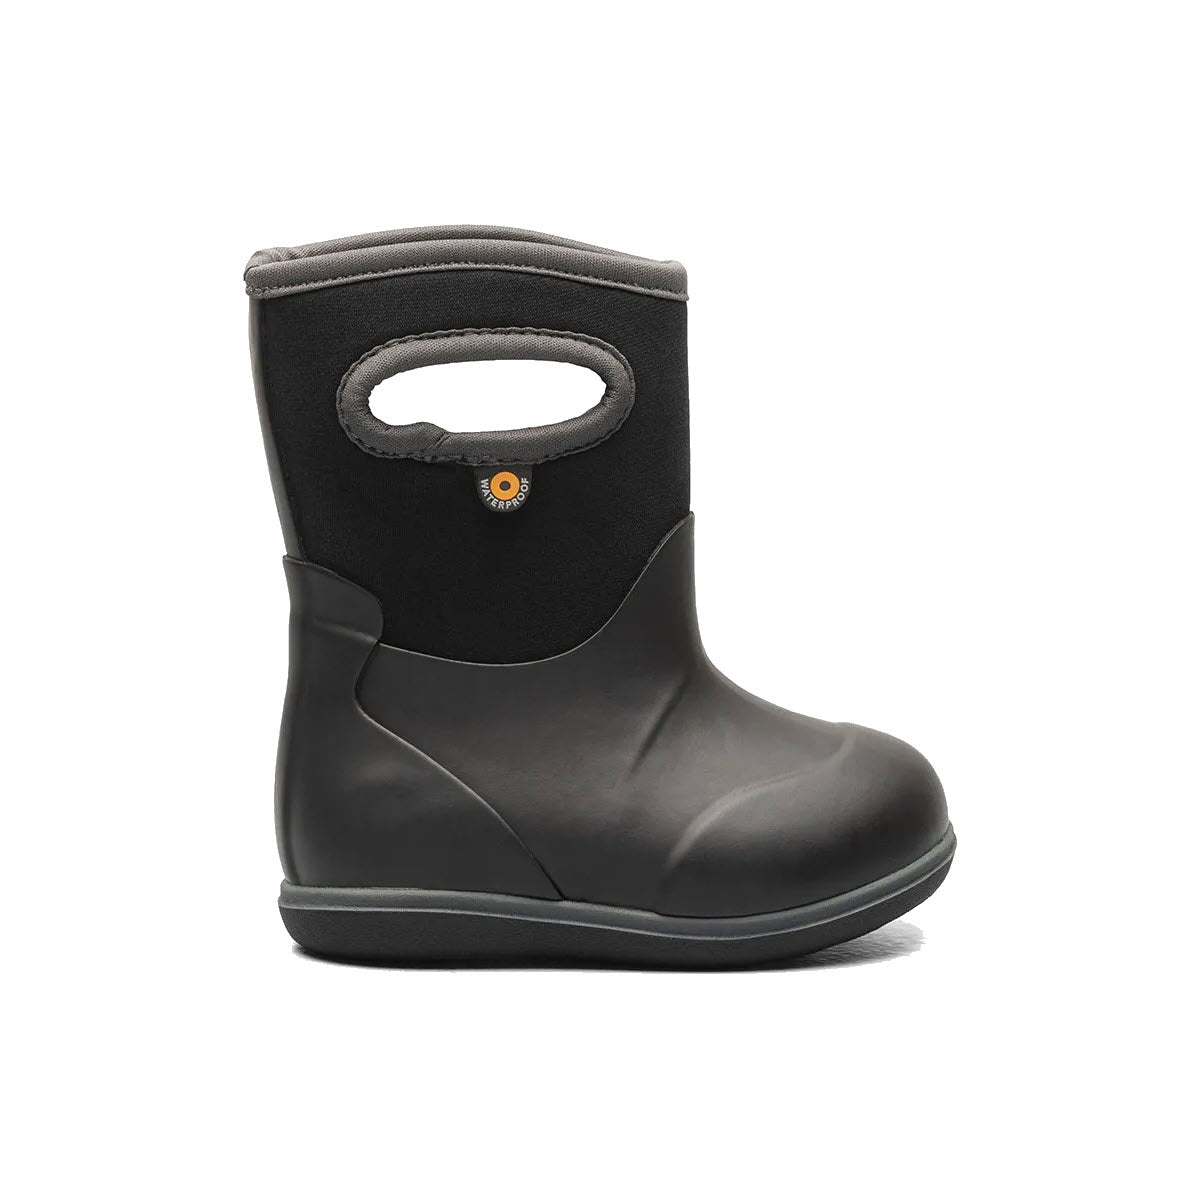 A black rubber boot with a high top featuring a gray neoprene cuff, waterproof construction, and a small orange logo near the handle - the BOGS BABY CLASSIC SOLID BLACK from Bogs.